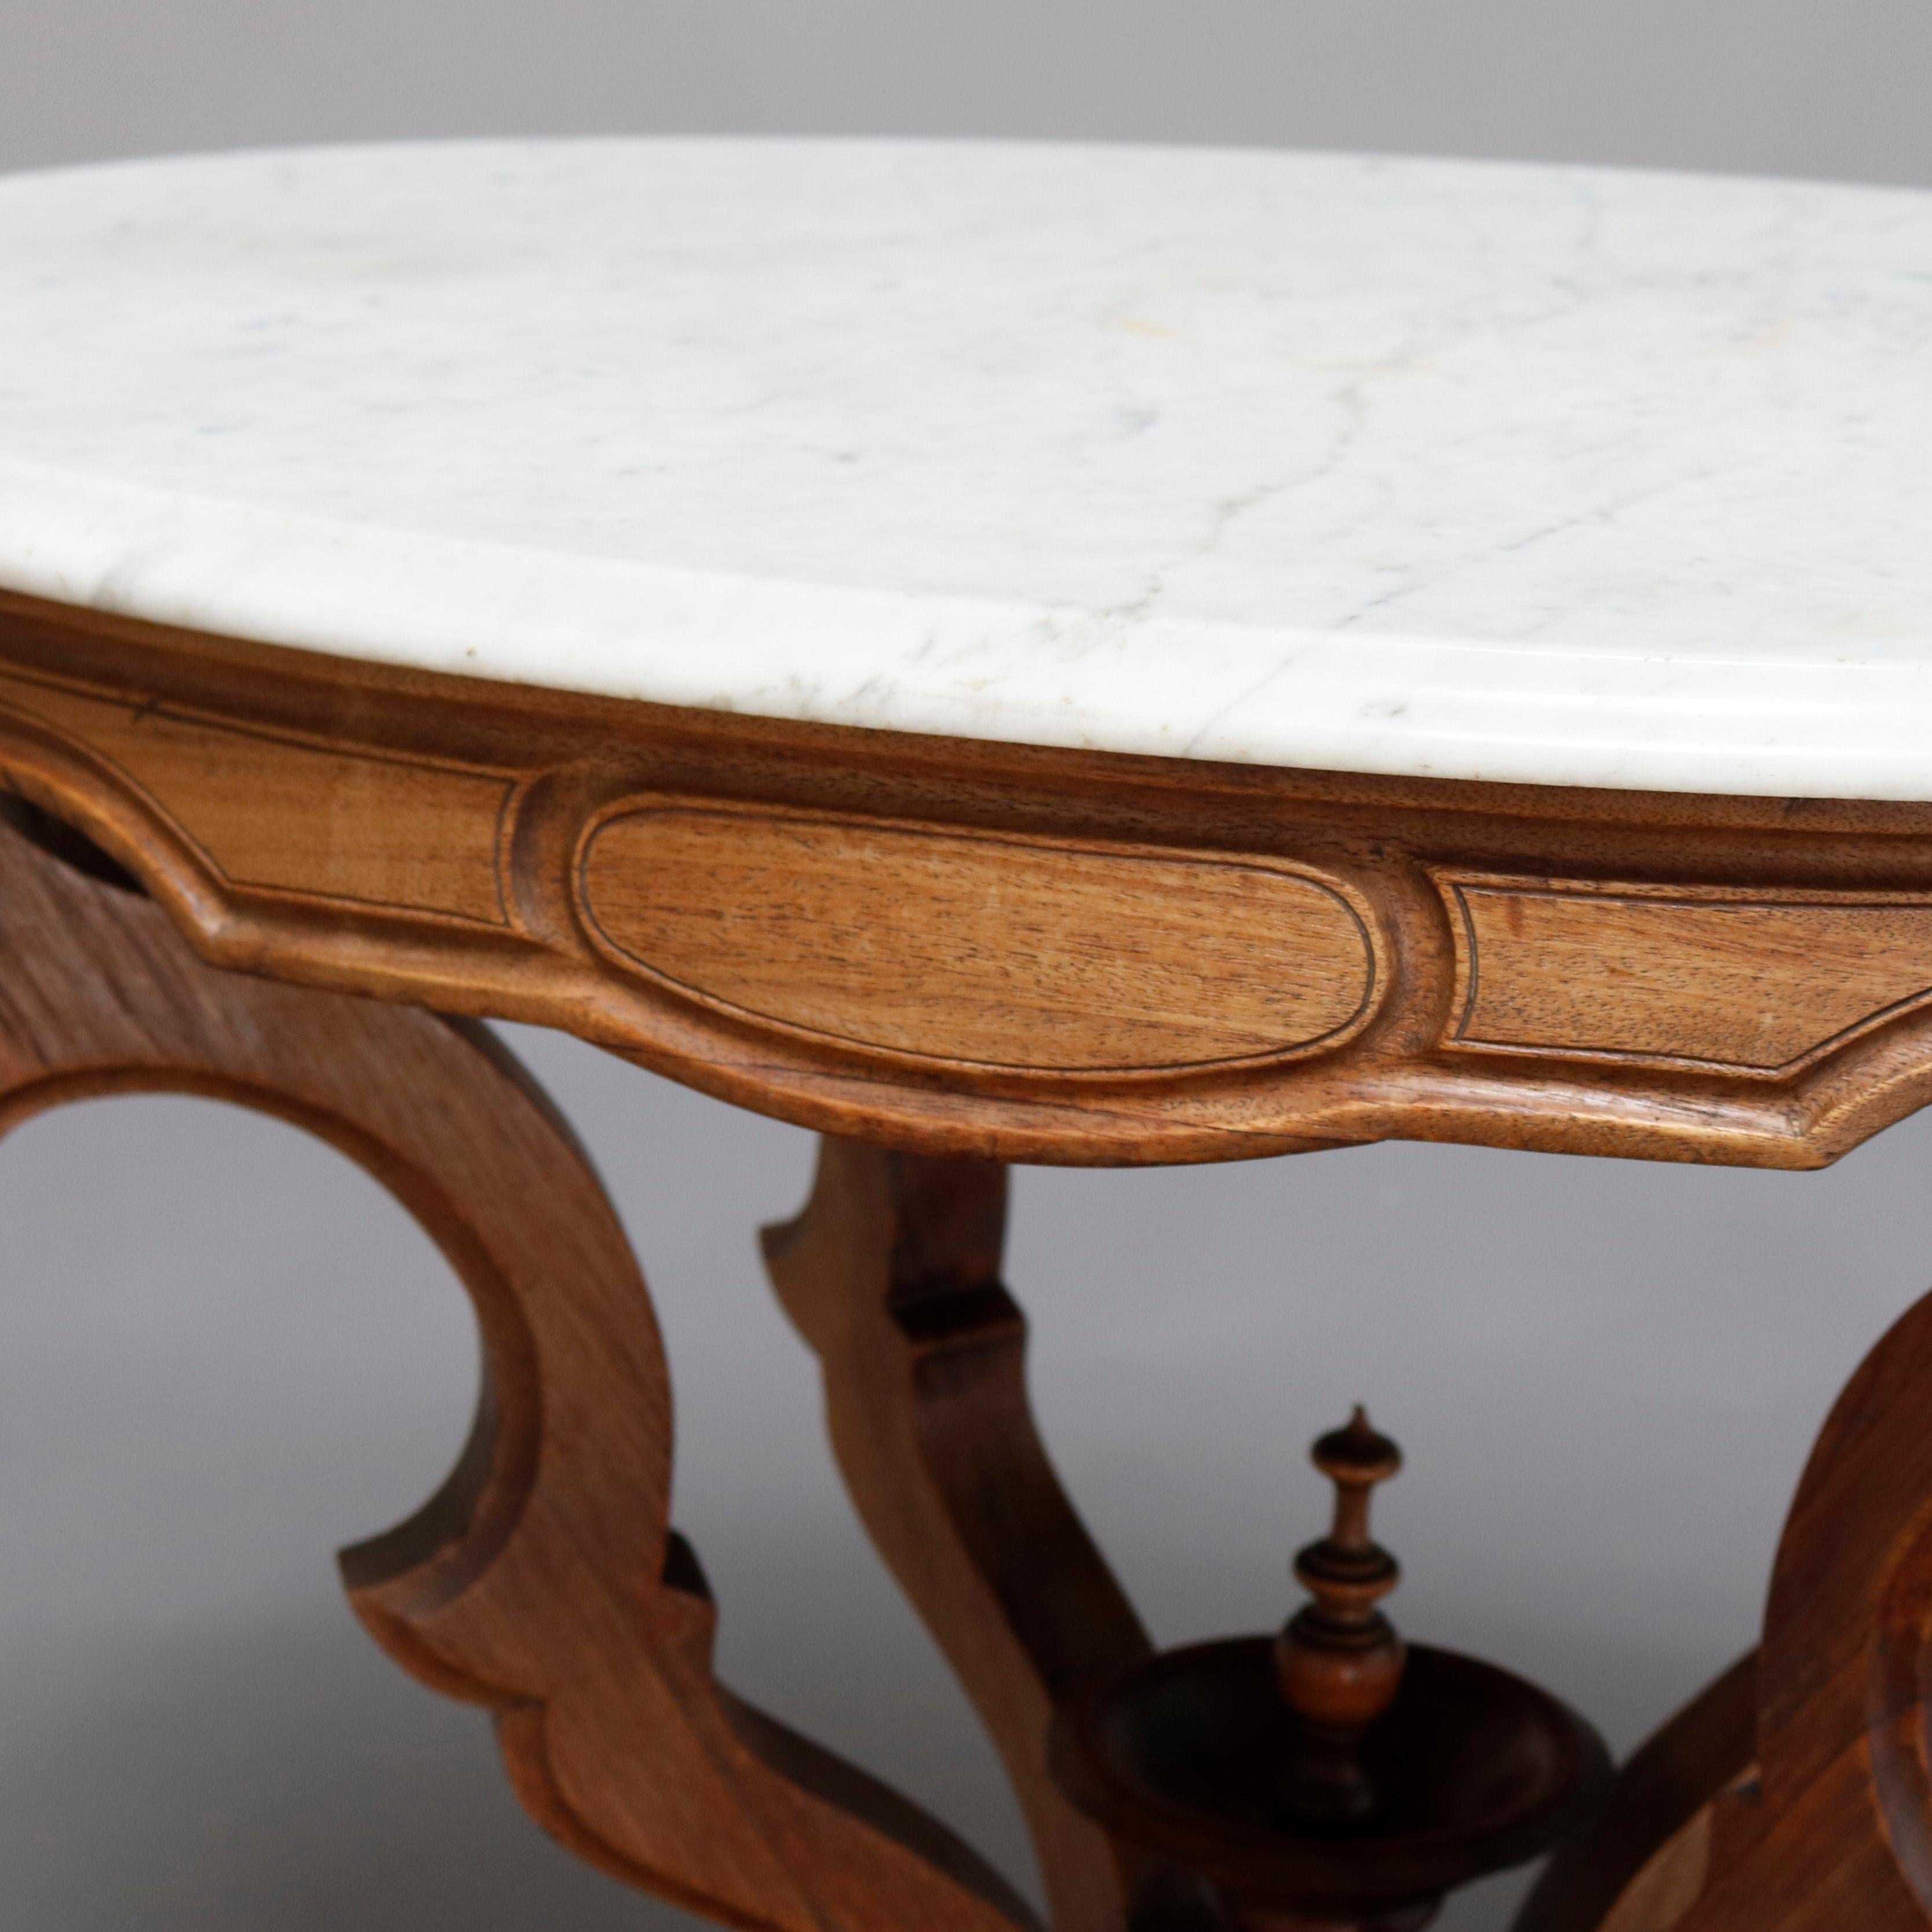 American Antique Victorian Carved Walnut & Beveled Marble Side Table, circa 1880